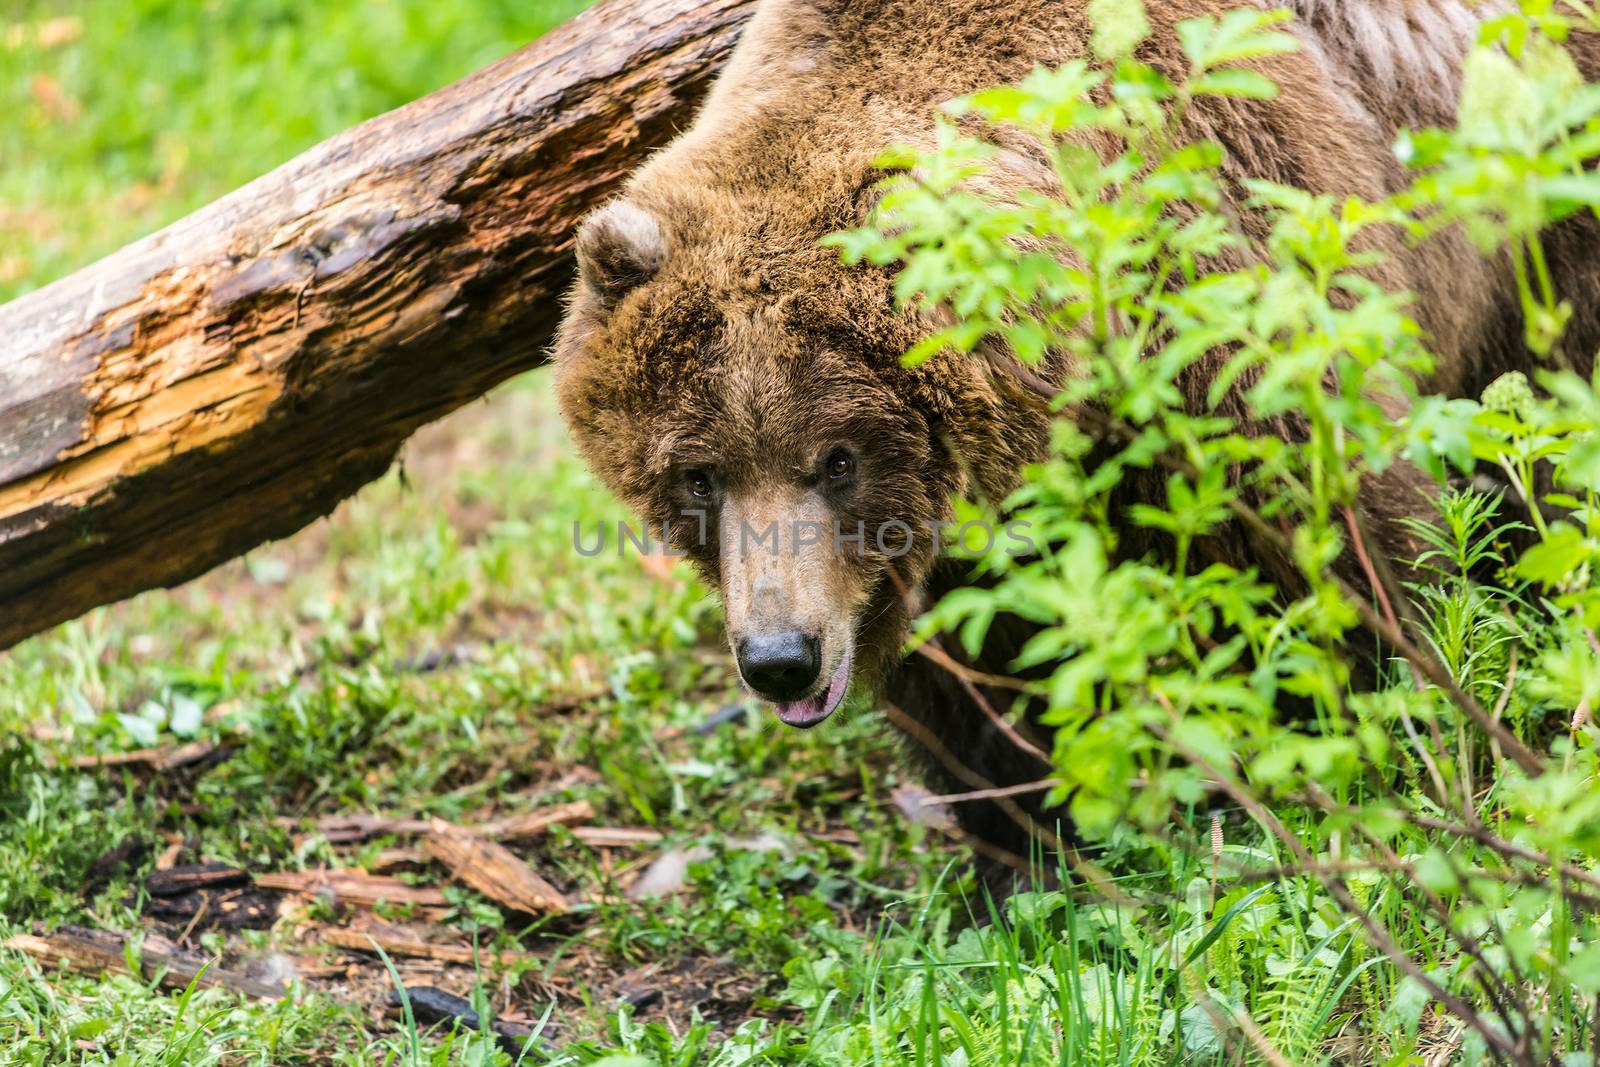 Watchful female grizzly bear in forest clearing near rotten log